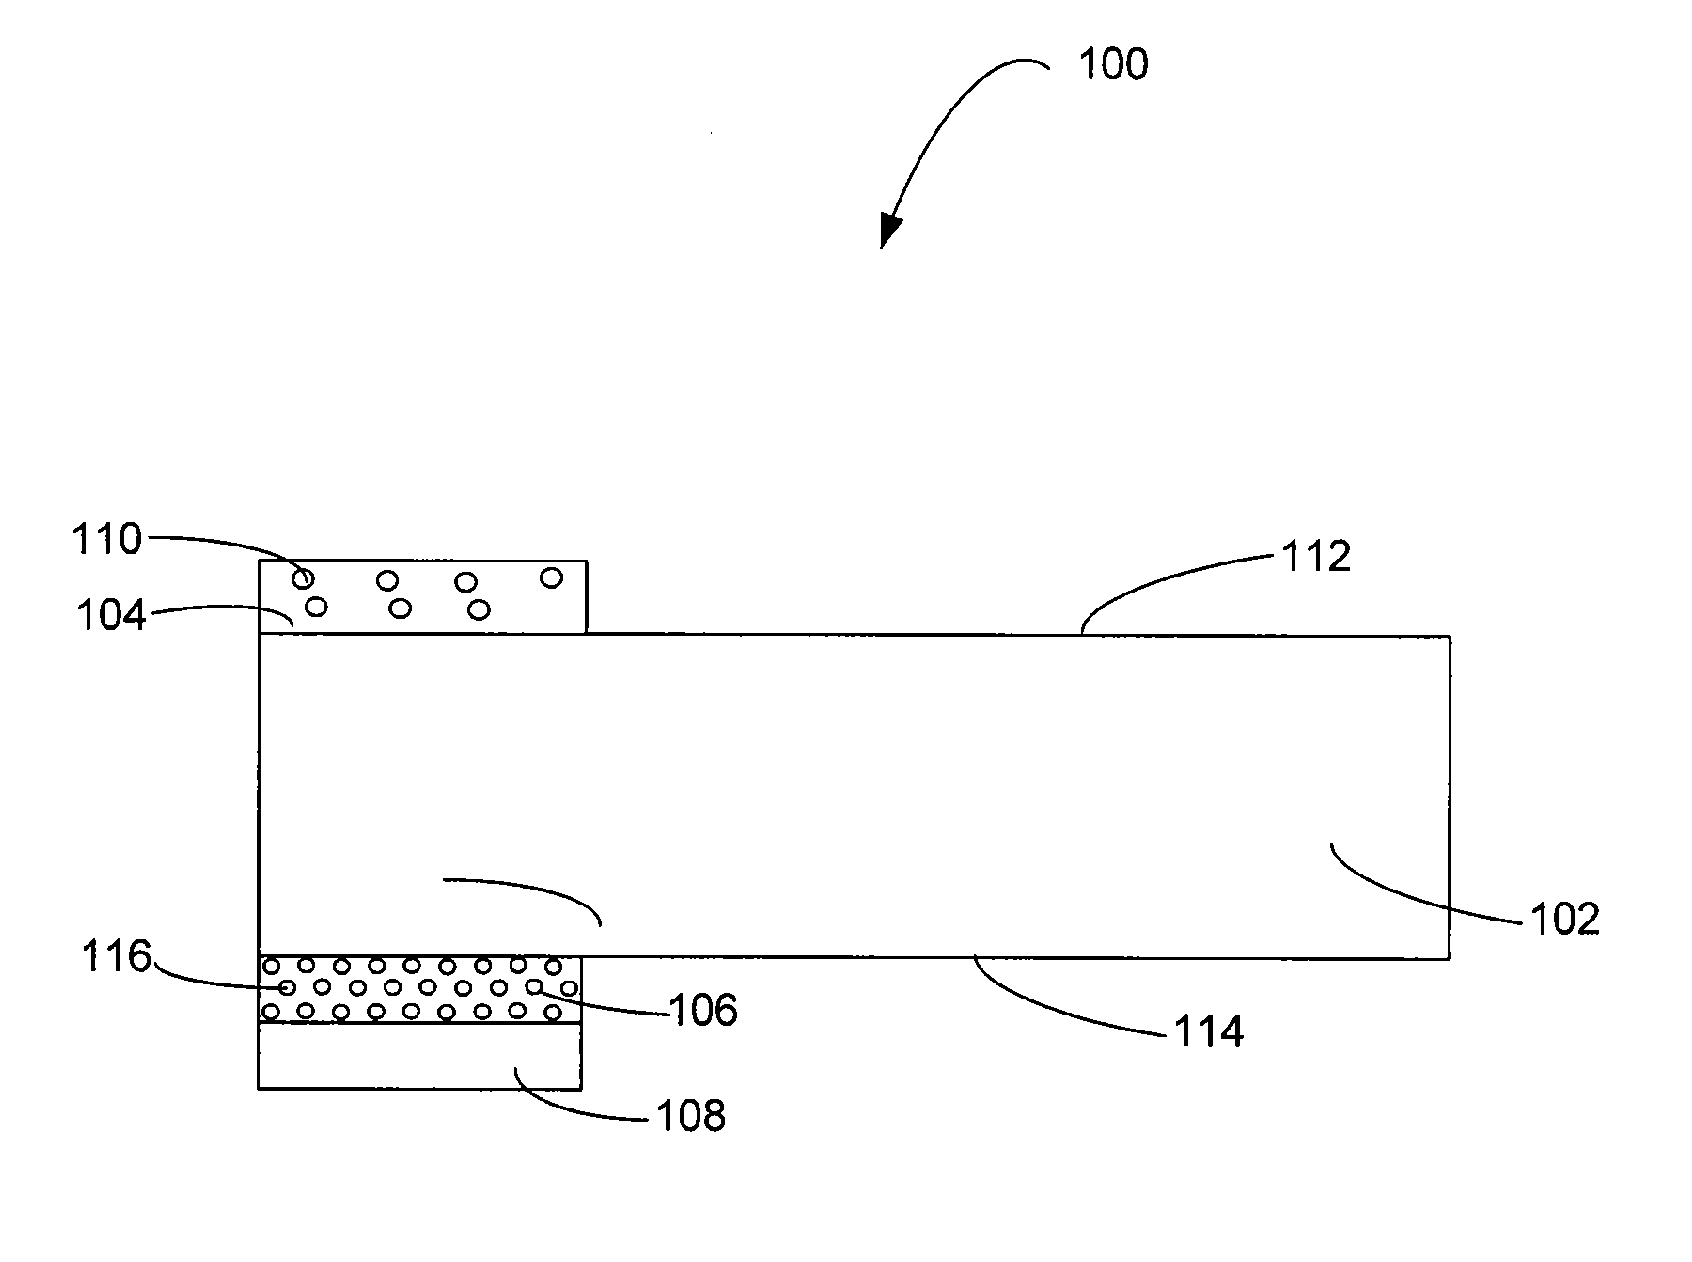 Coating composition including fluorescent material for producing secure images